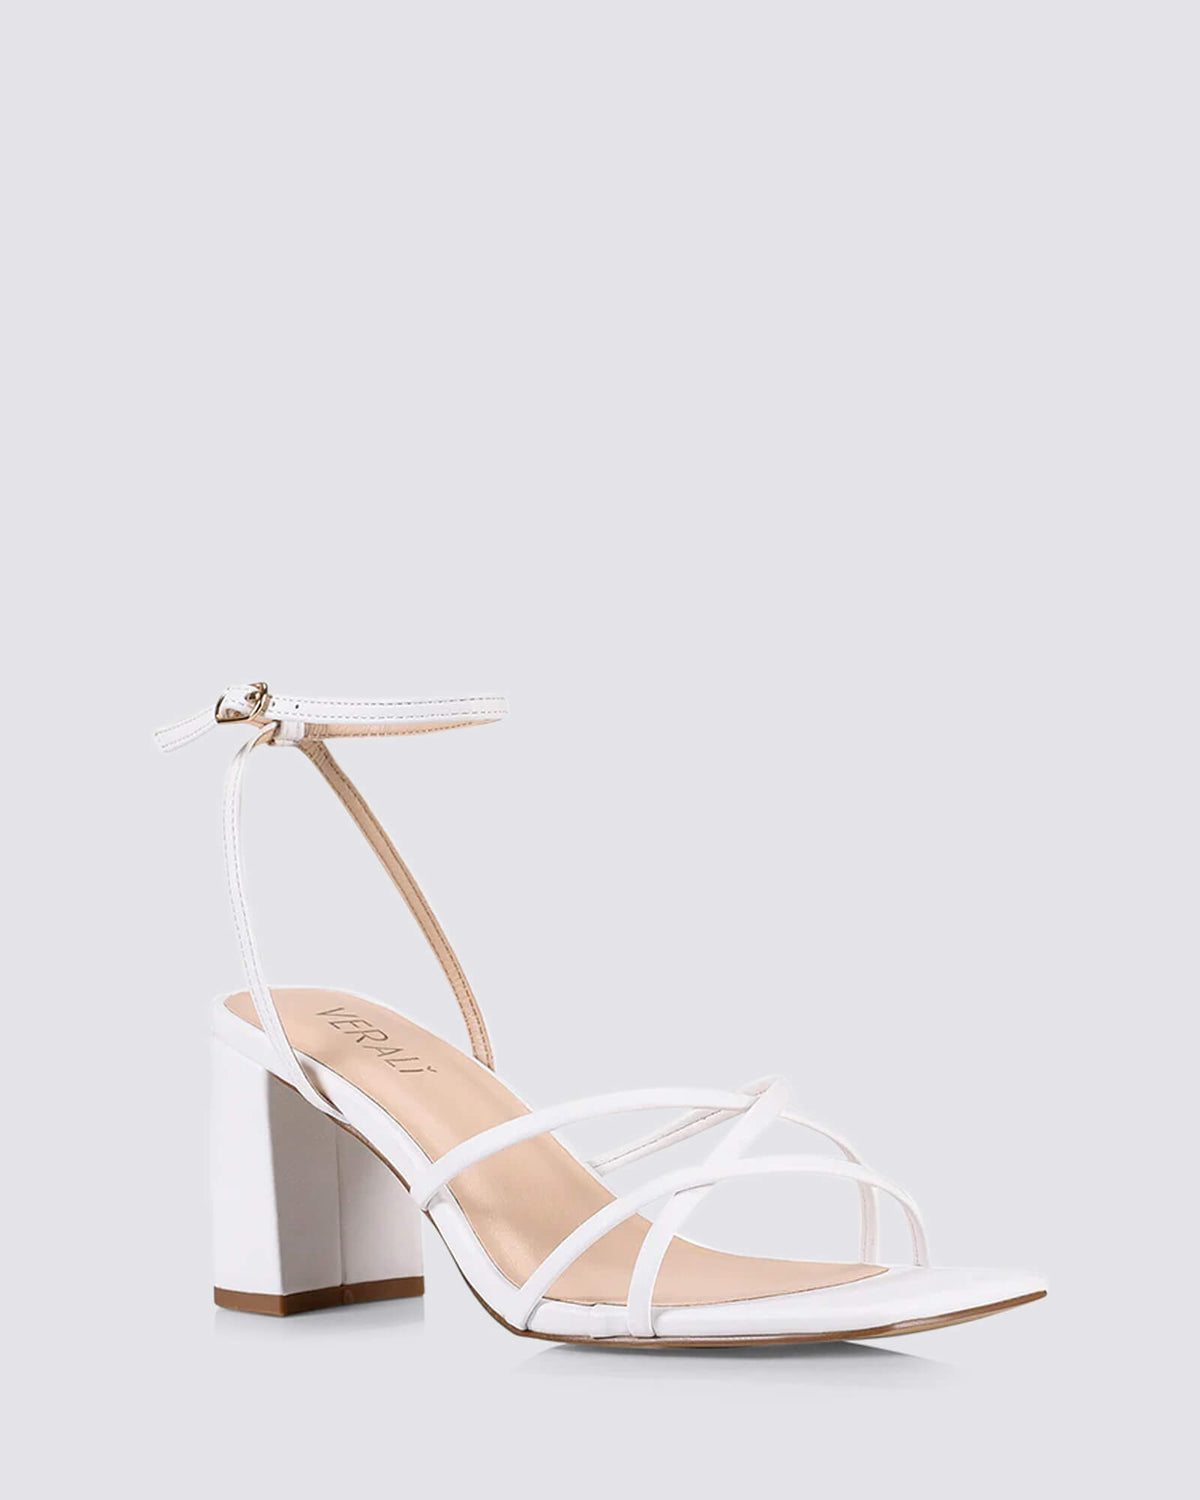 Cartia Block Heels in Almond | Number One Shoes